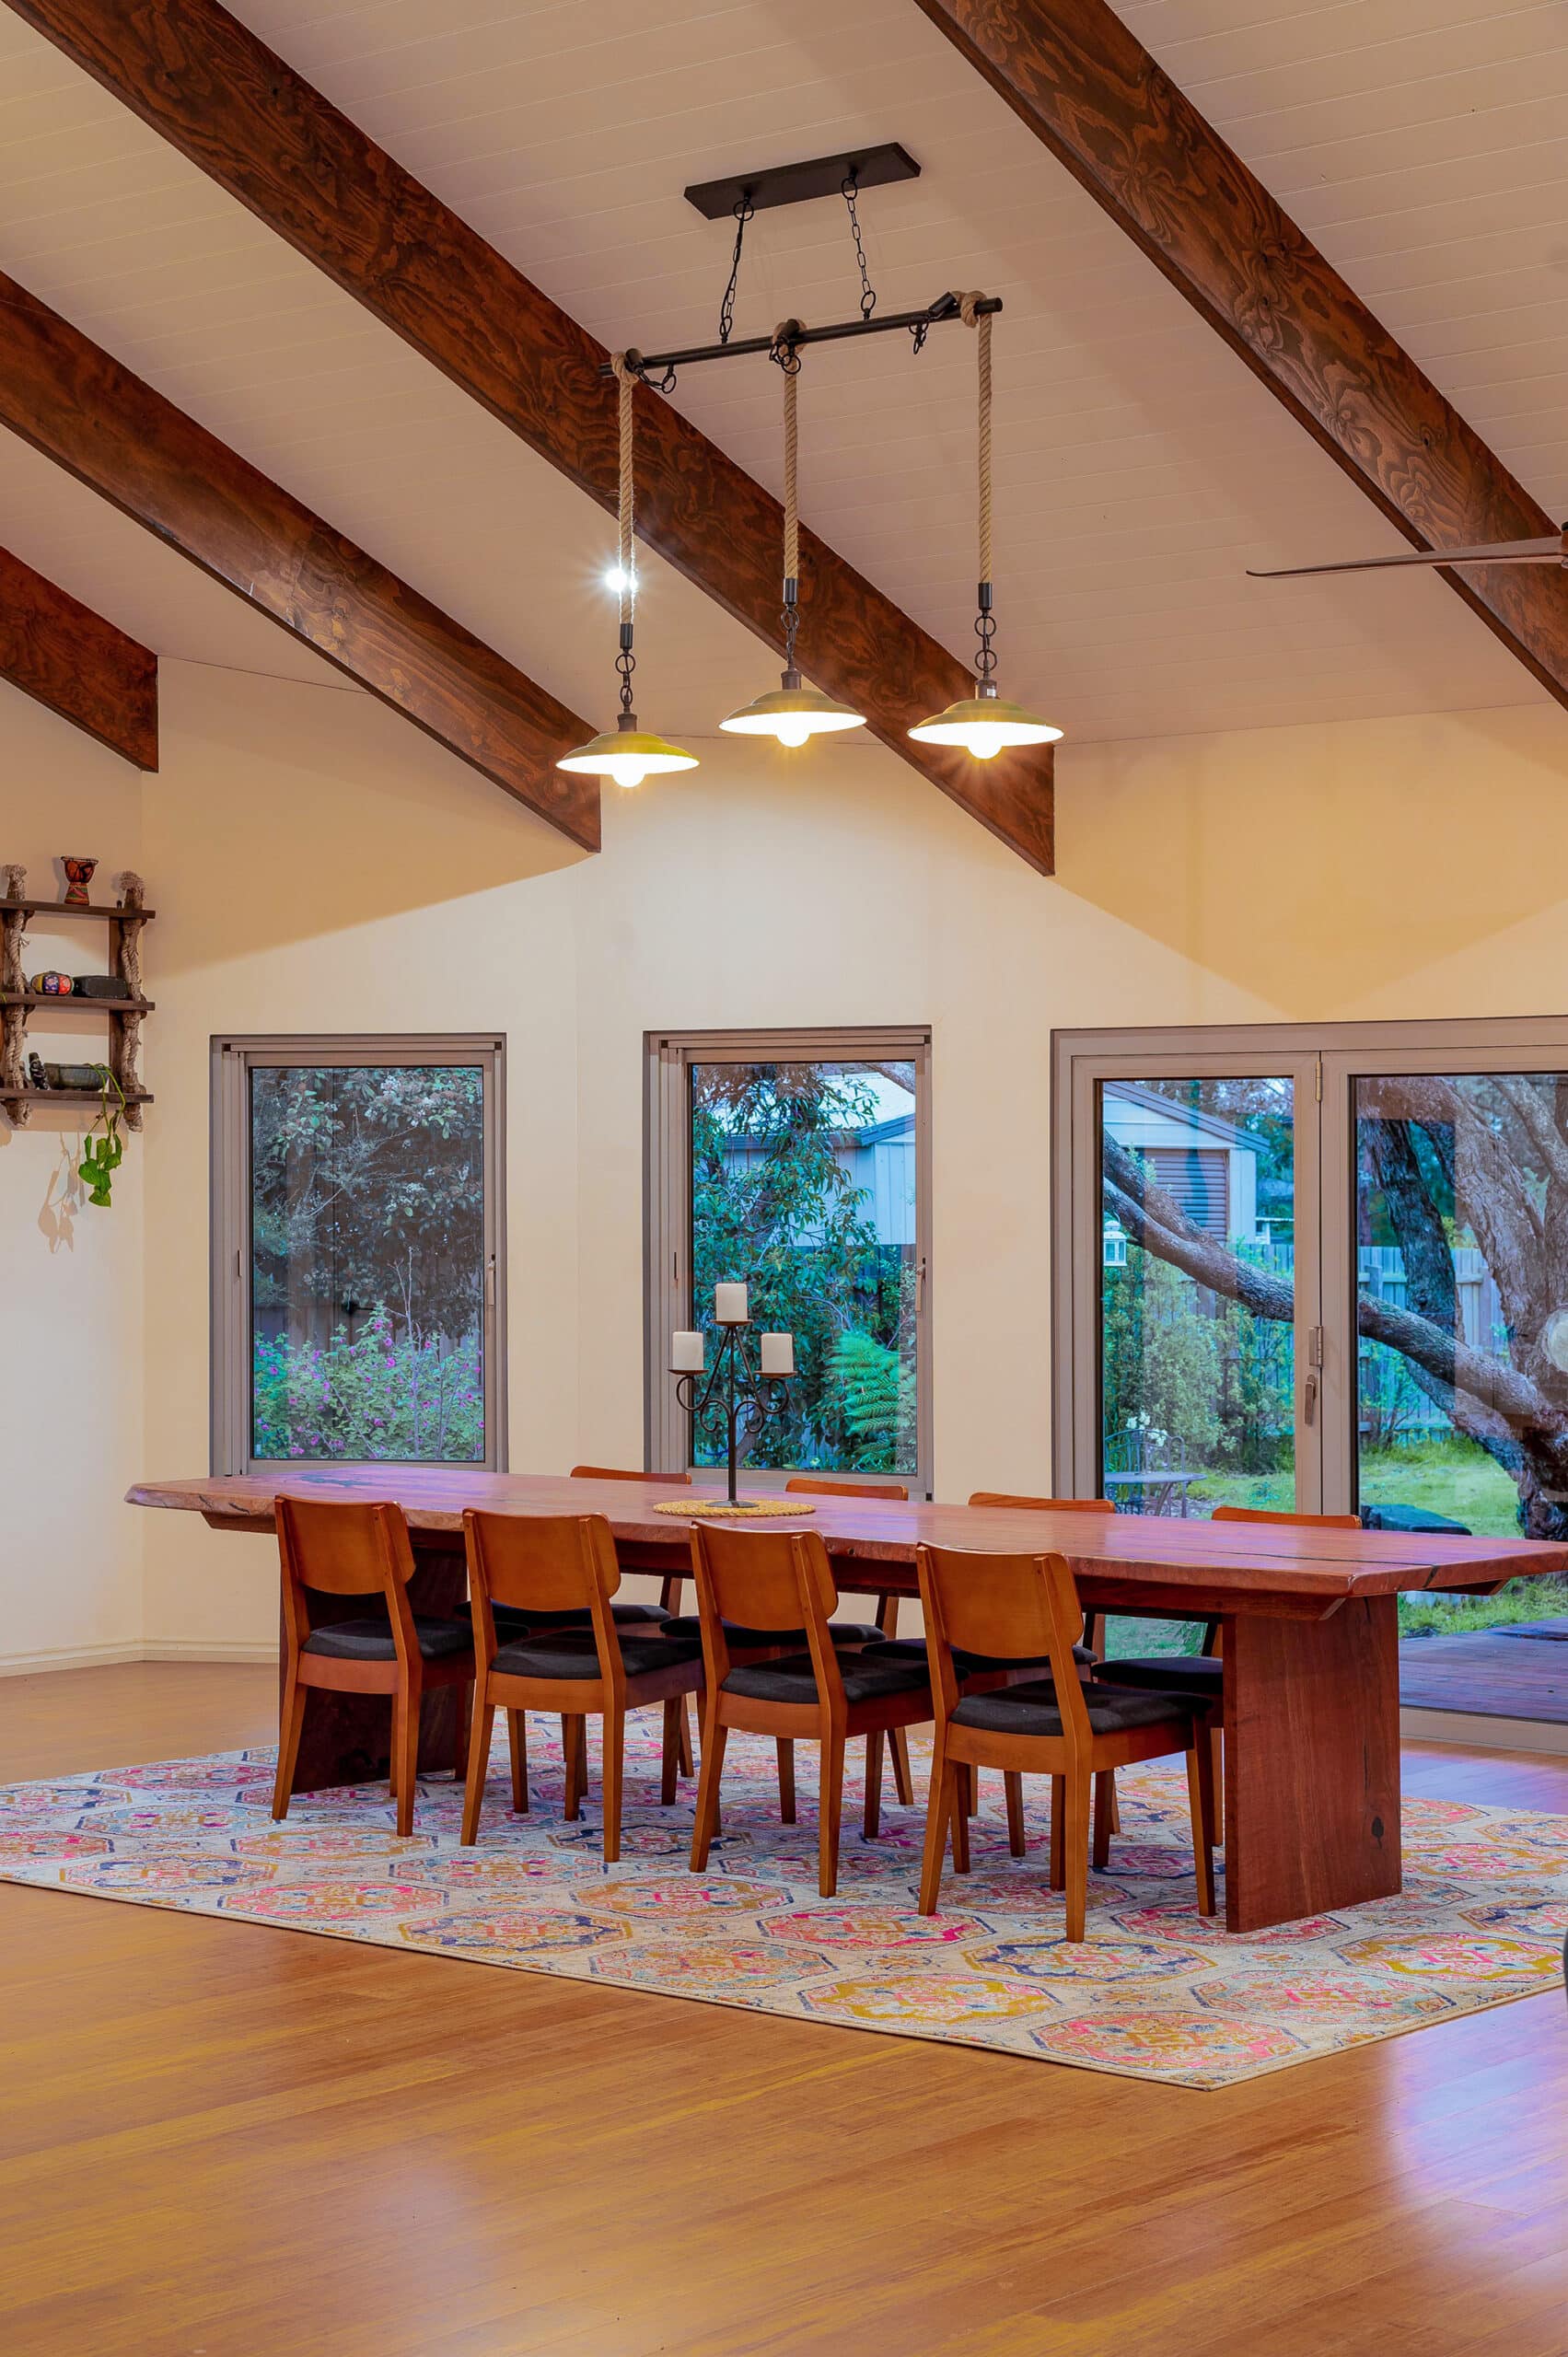 Renovated dining area with high ceilings